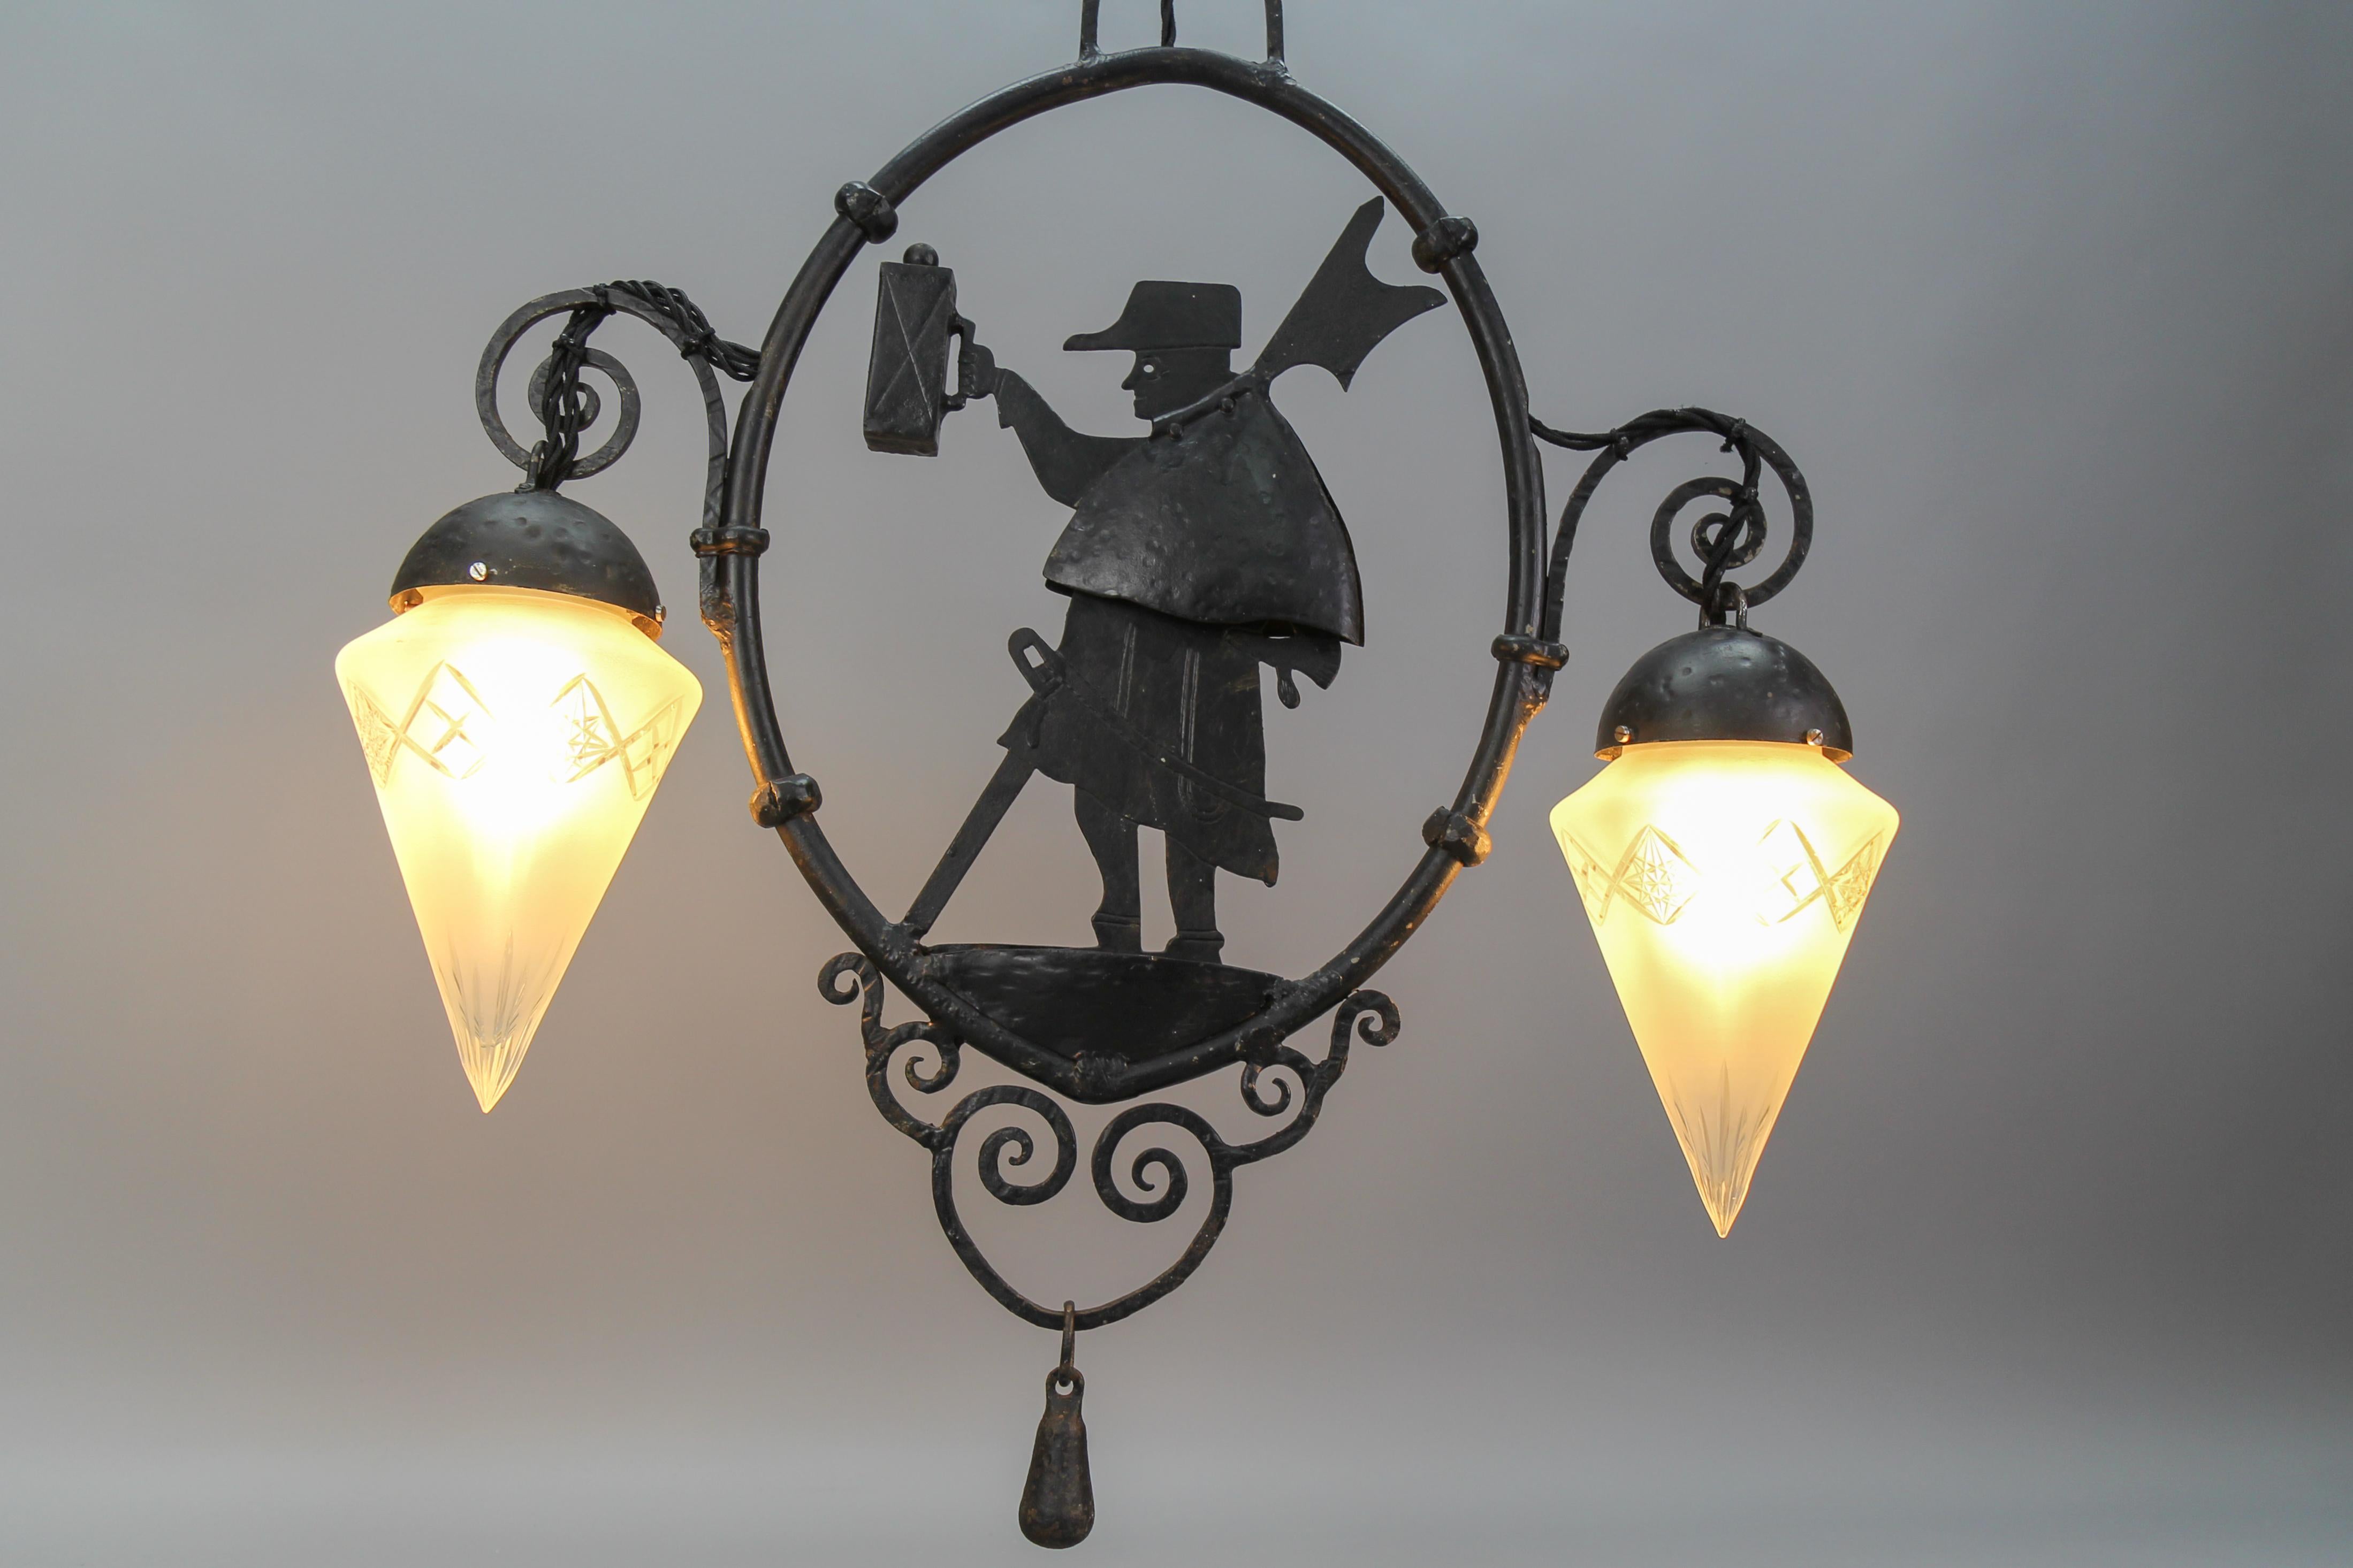 Wrought iron and cut frosted glass two-light pendant chandelier with night watchman, from ca 1910.
Gorgeous masterfully crafted wrought iron pendant chandelier with a night watchman figure and two beautiful white cone-shaped cut frosted glass